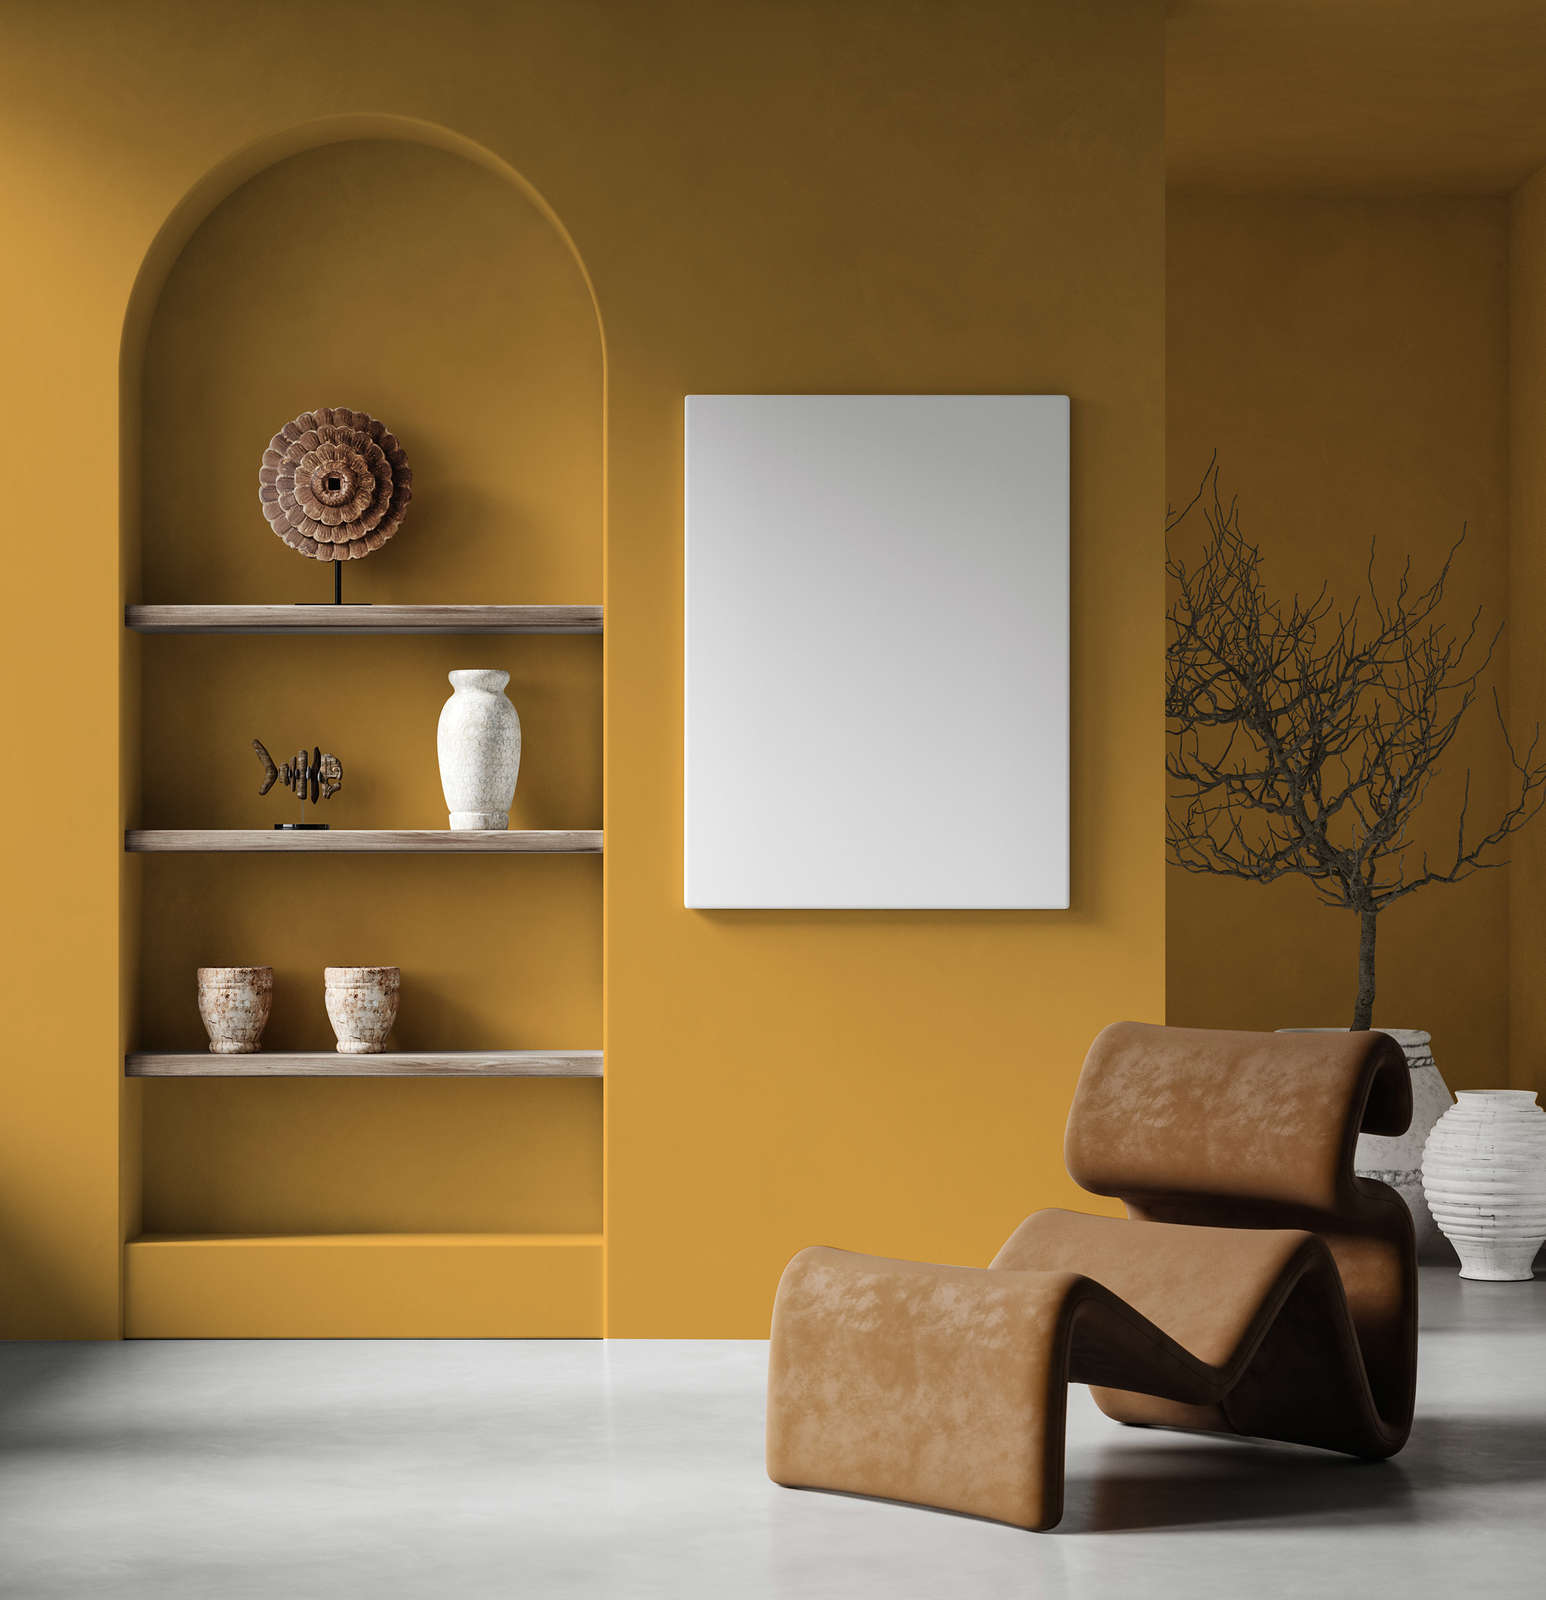             Premium Wall Paint strong saffron yellow »Juicy Yellow« NW806 – 2,5 litre
        